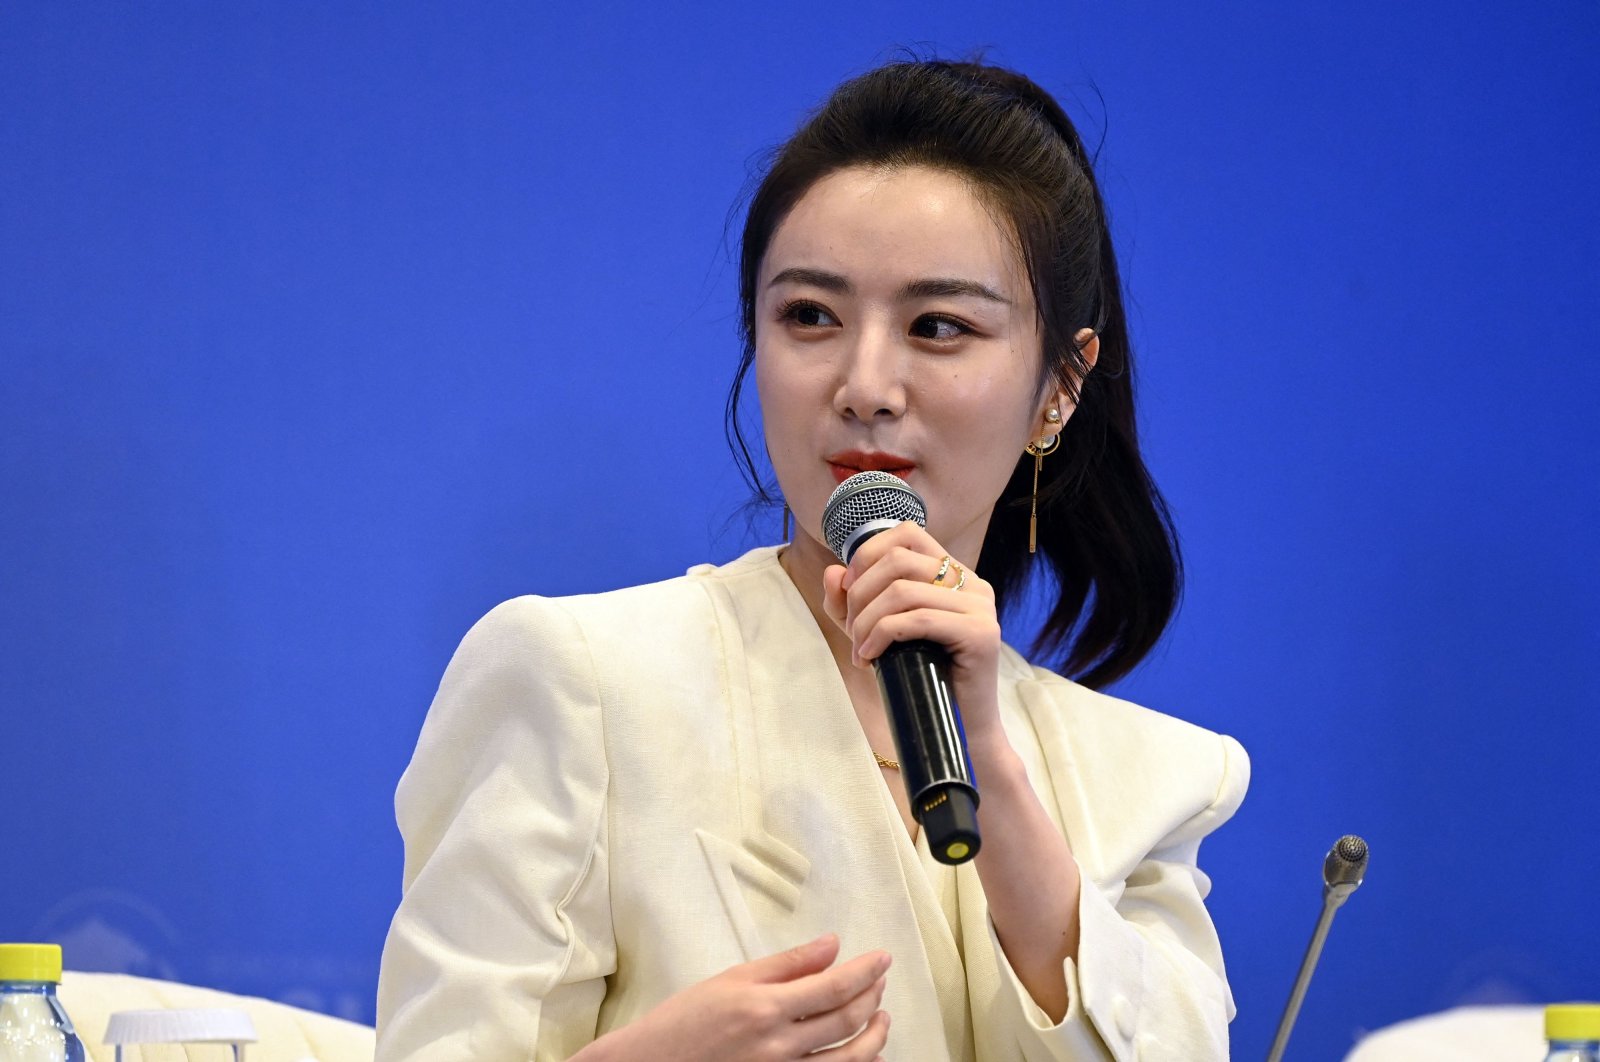 E-commerce livesreamer Huang Wei, also known as Viya, speaks during the Boao Forum for Asia (BFA) in Boao, Hainan province, China, April 20, 2021. (Photo by CNS via AFP)